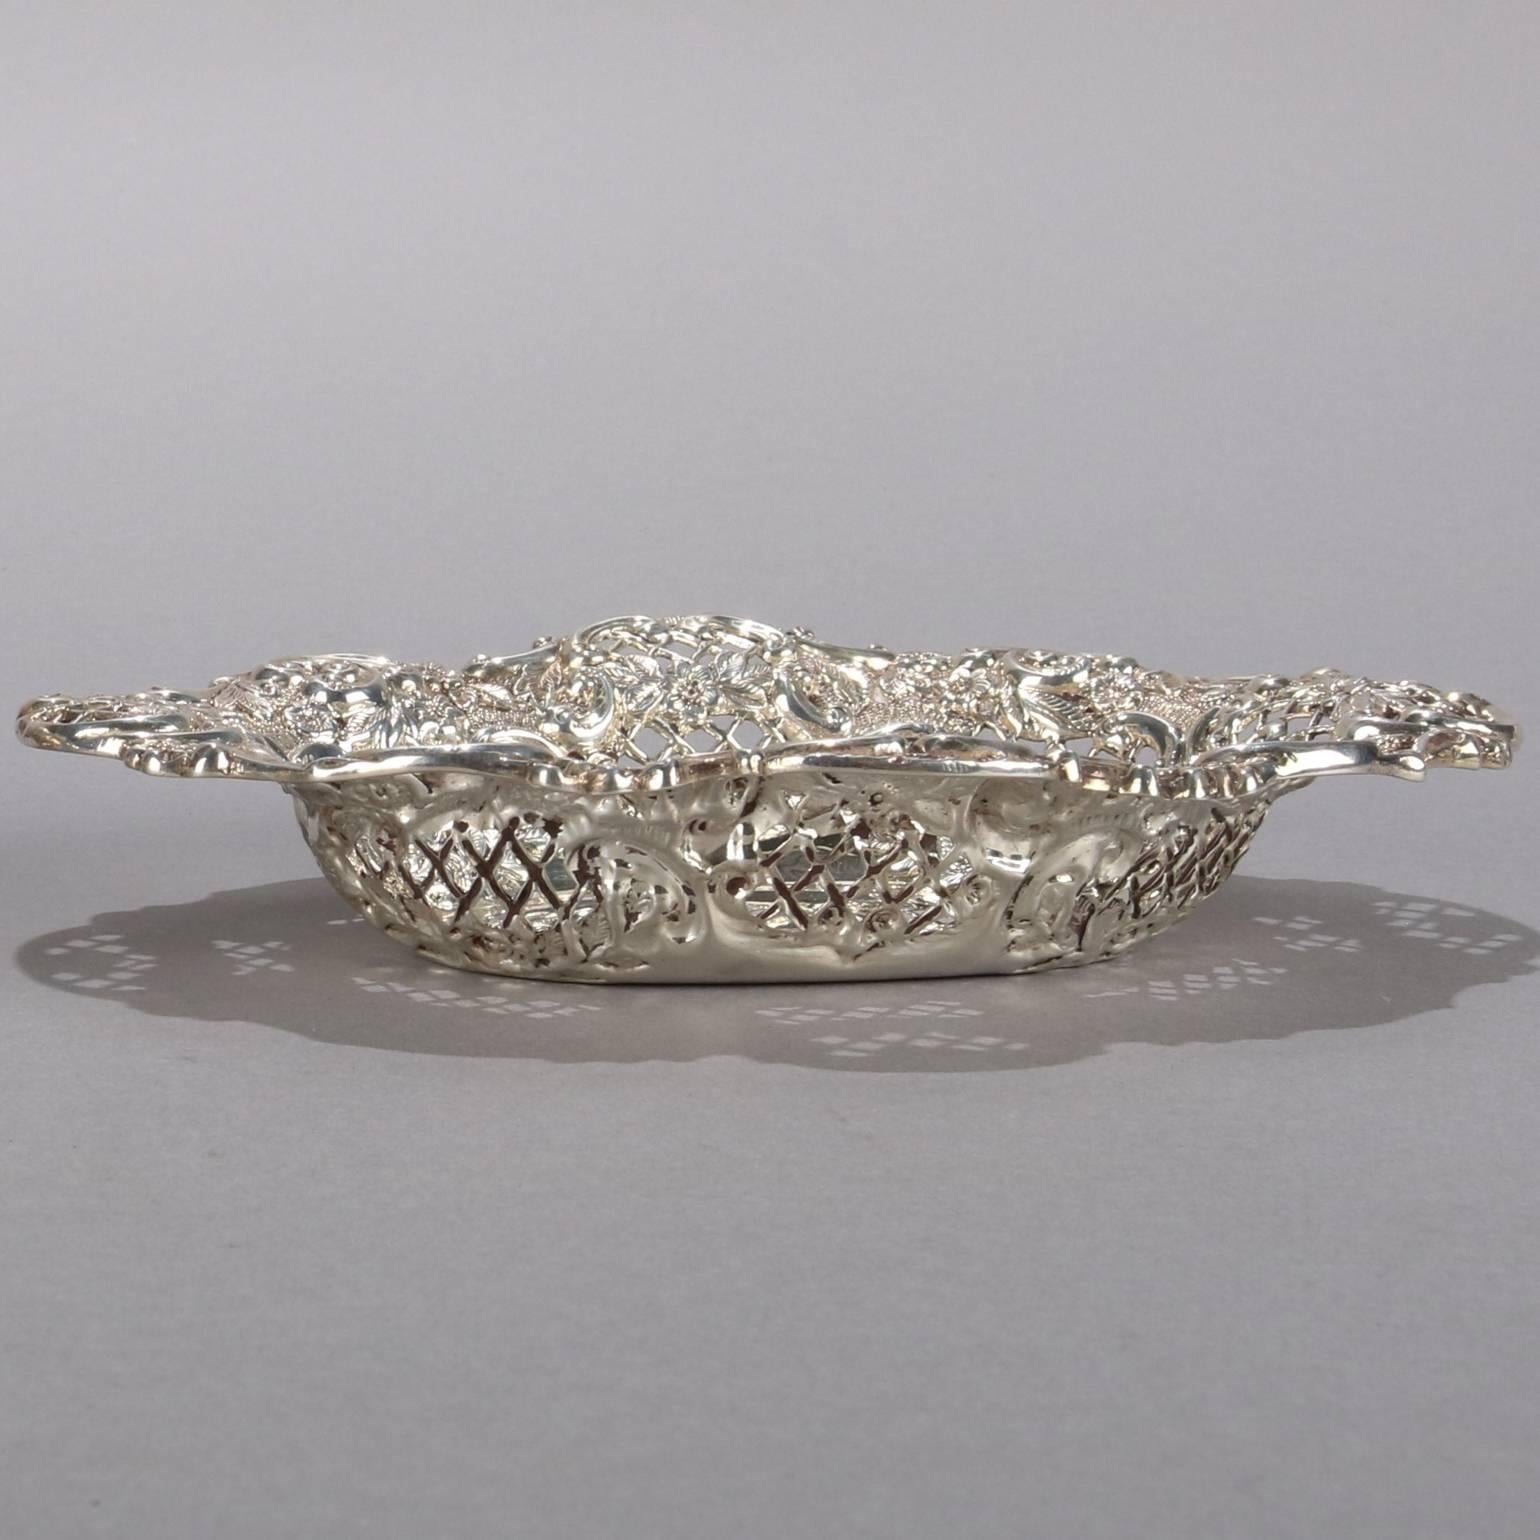 Great Britain (UK) Pair of Antique Repoussé Sterling Silver Reticulated Basket by Henry Matthews